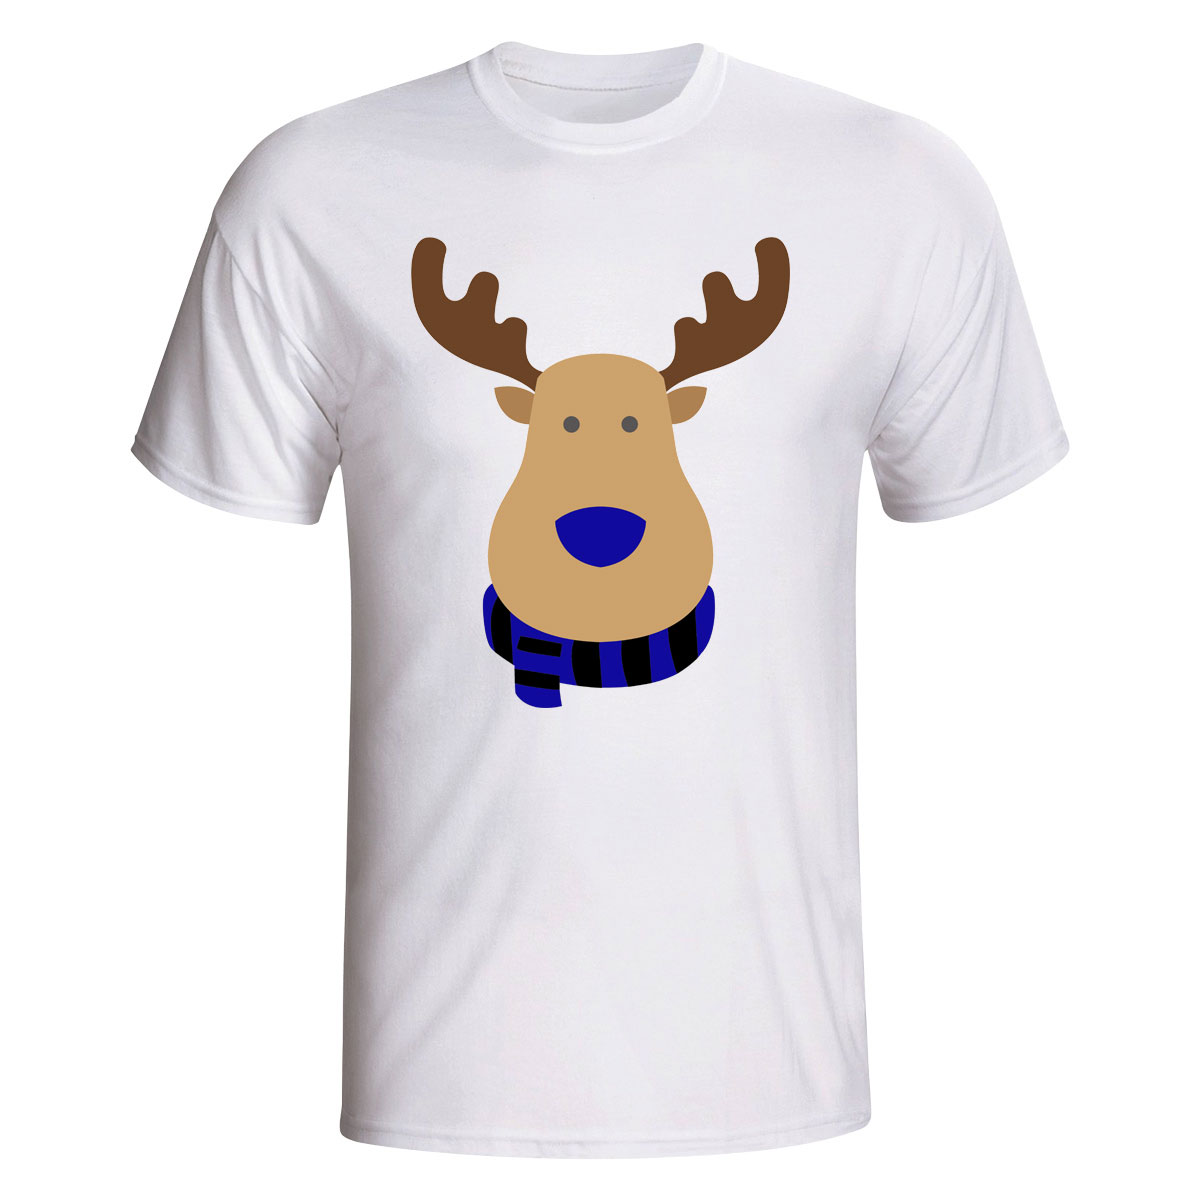 Club Bruuge Rudolph Supporters T-shirt (white) - Kids